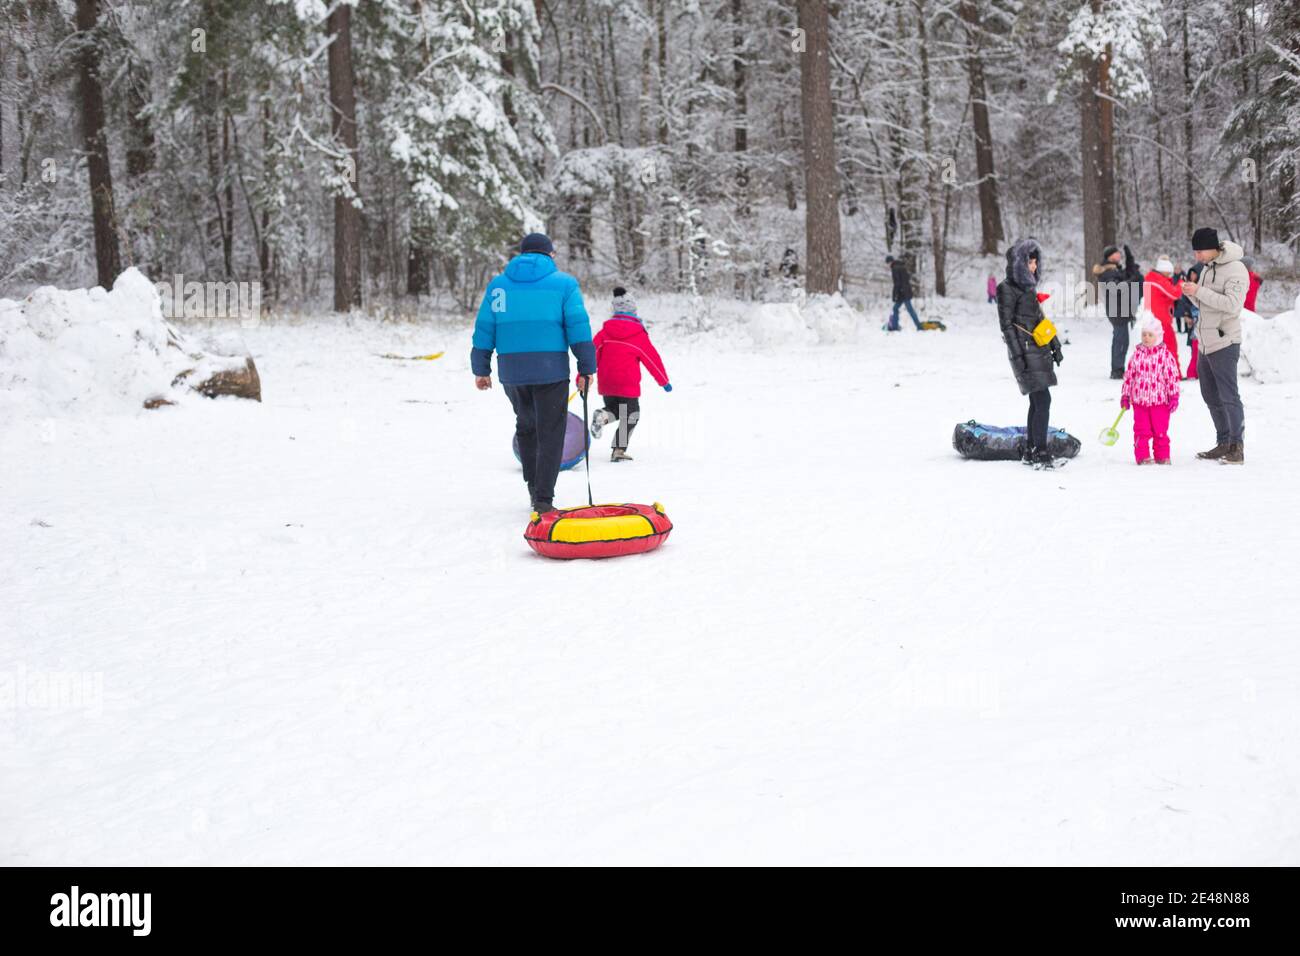 People walk in snowy winter forest with their families, with skis, sleds, inflatable tubing, roll down hill, build fortress and a snowman. Winter outd Stock Photo